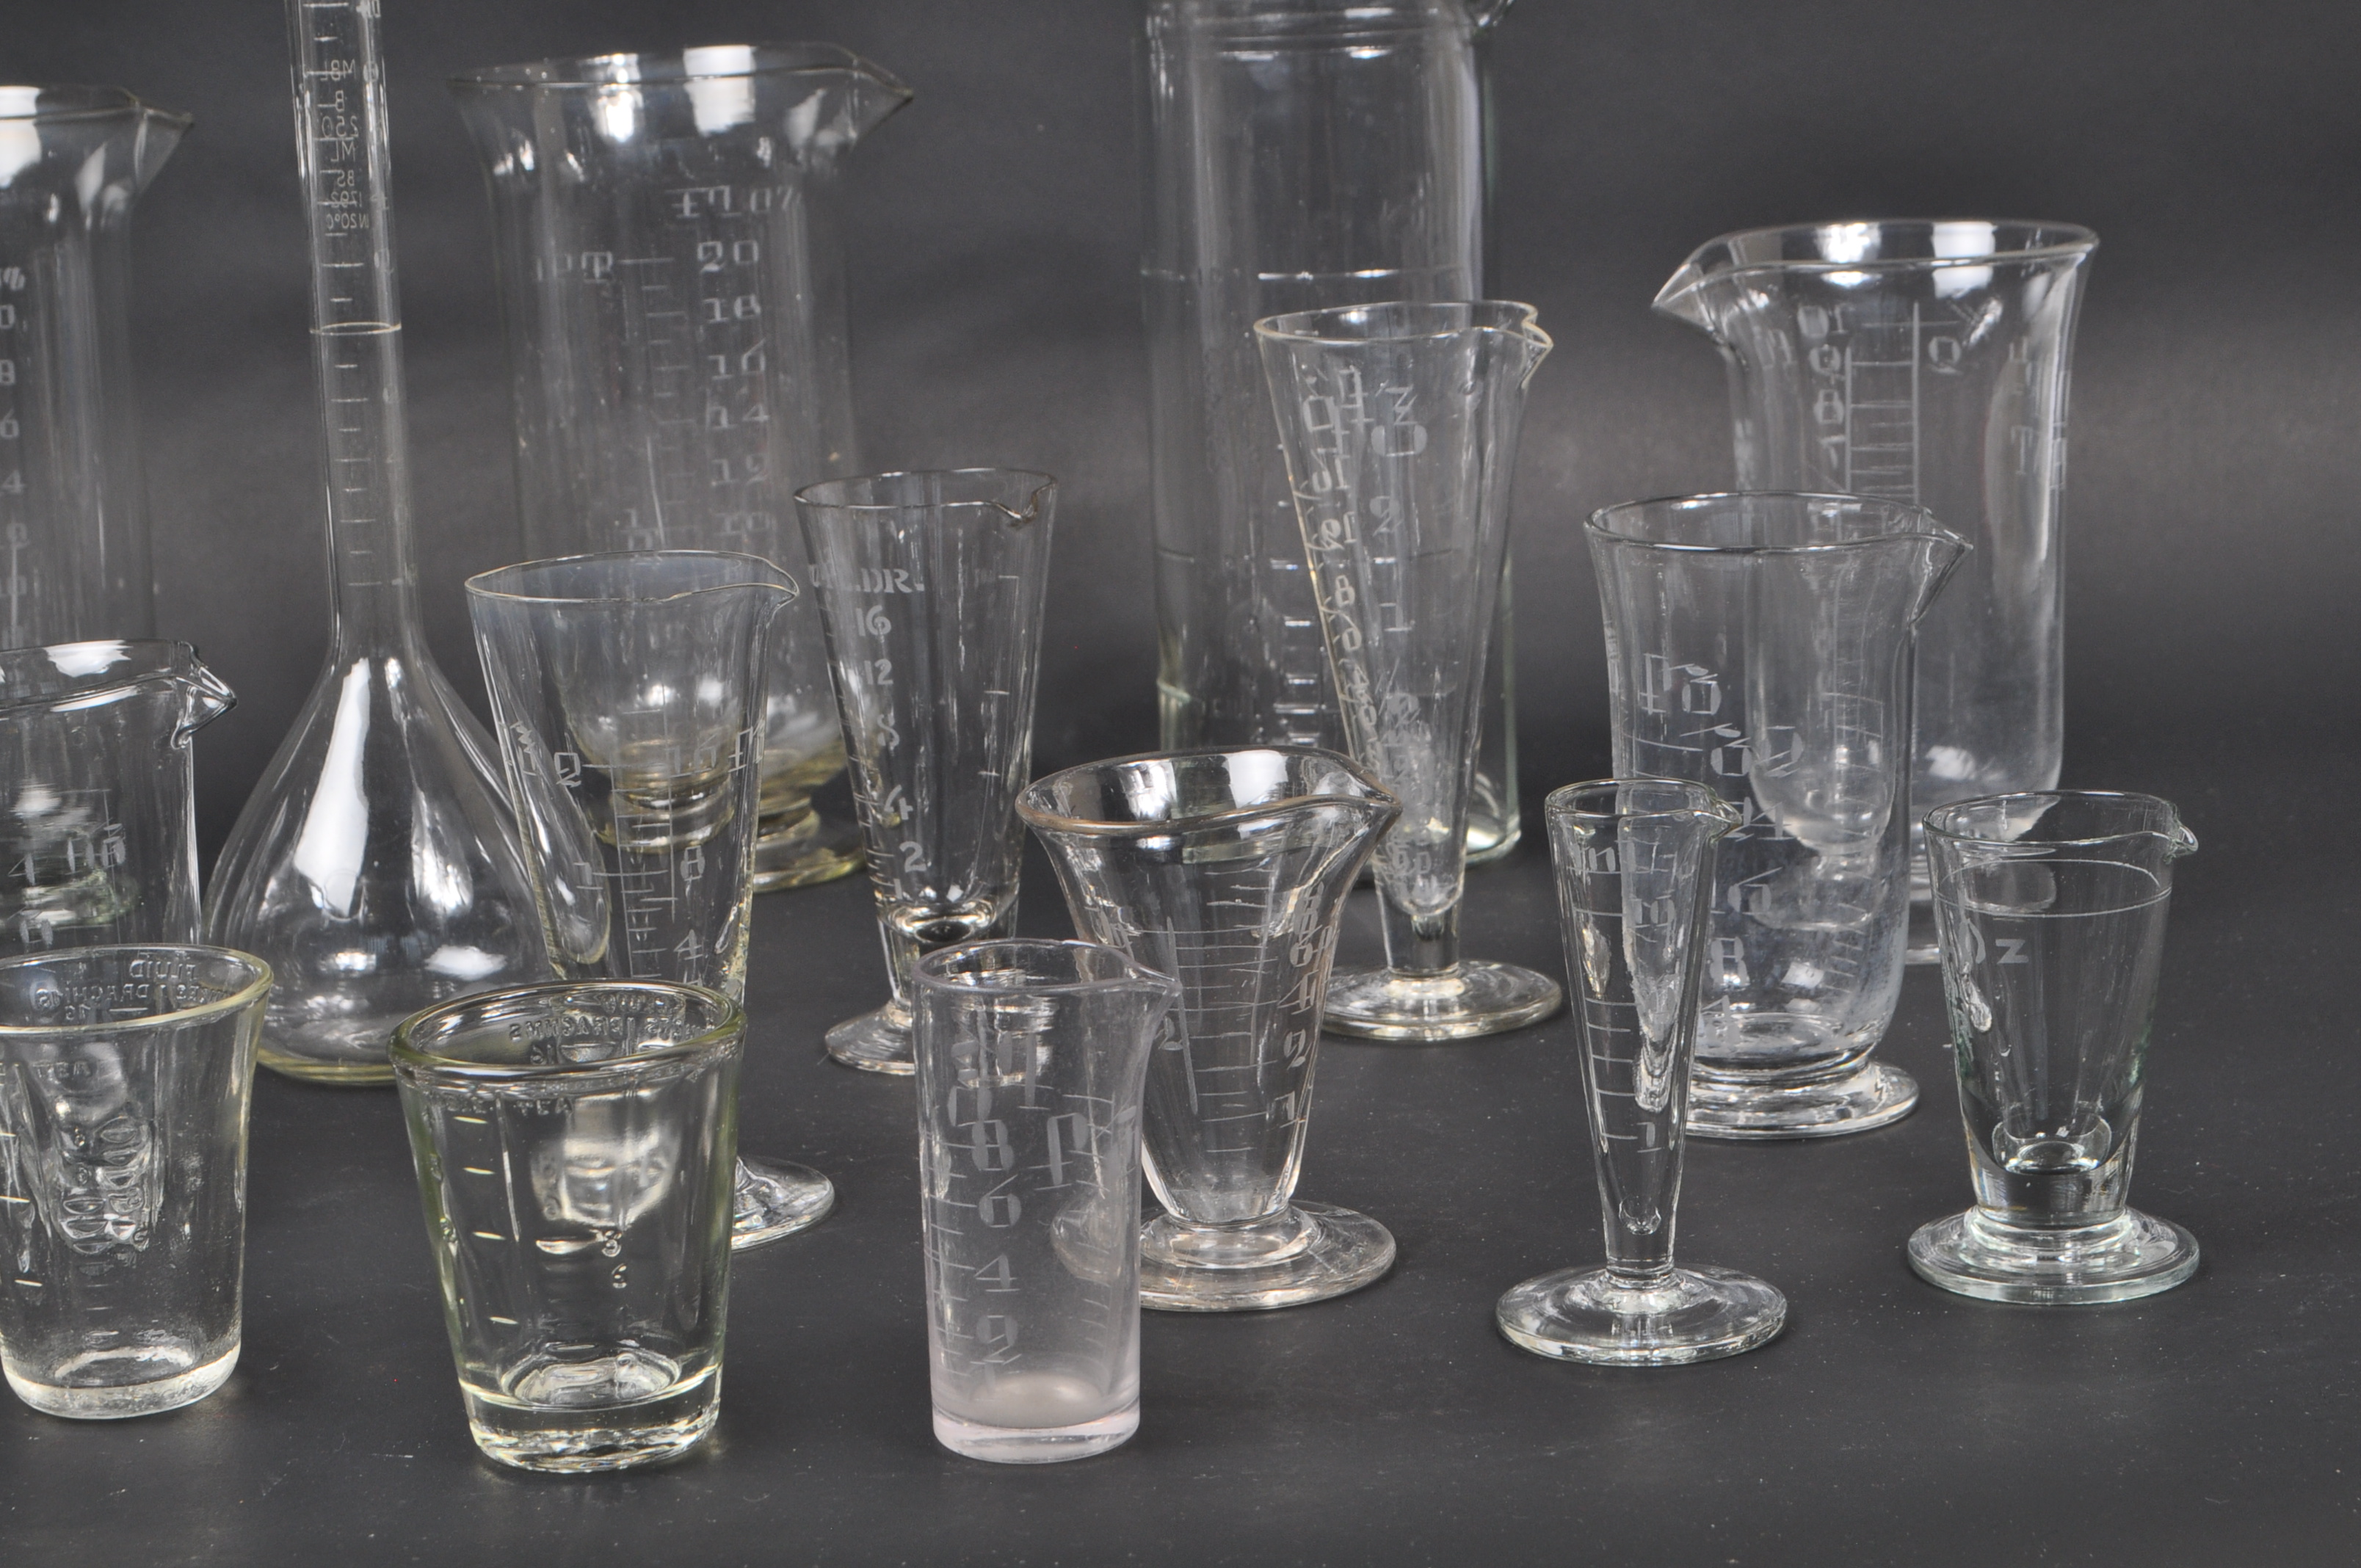 COLLECTION OF GLASS SCIENTIFIC CHEMICAL MEASURING EQUIPMENT - Image 4 of 11